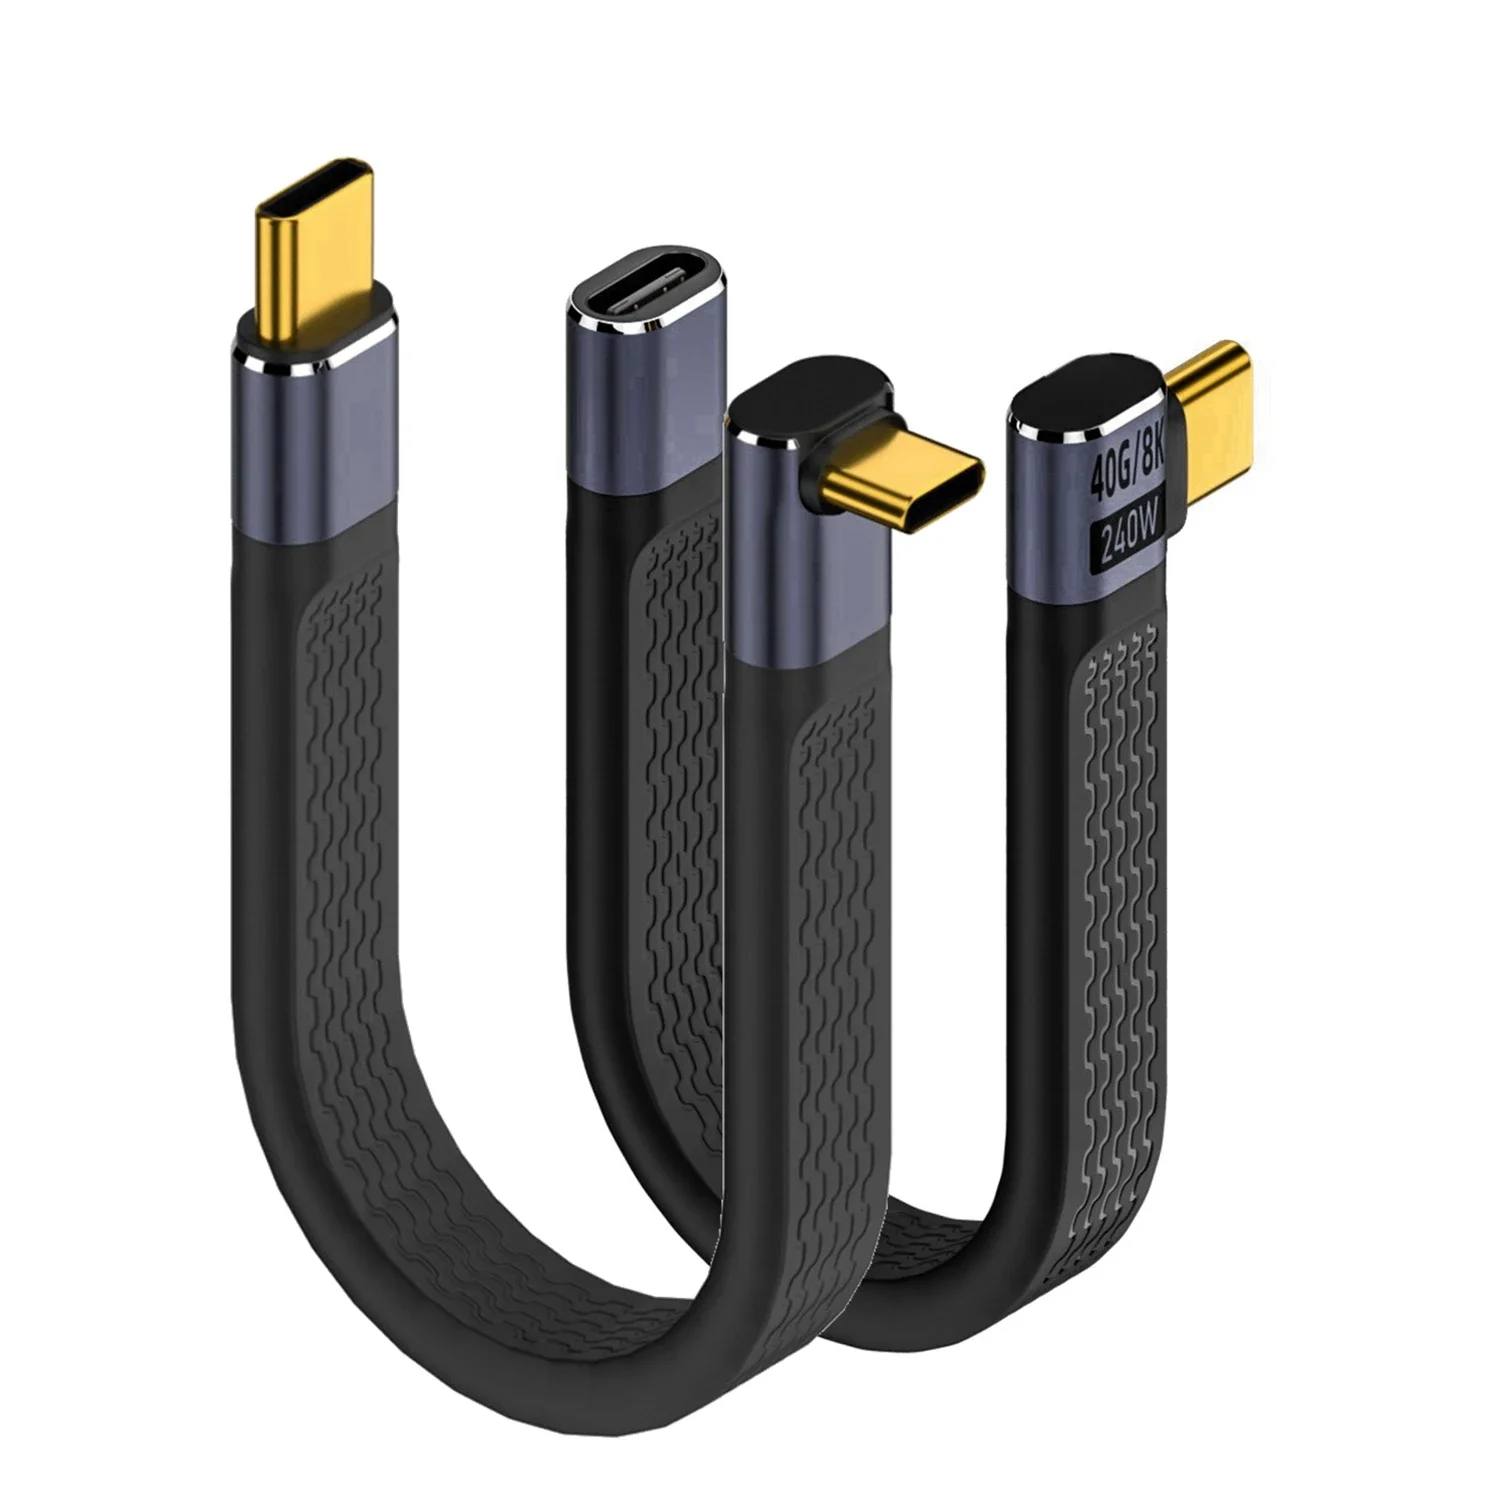 

USB 3. 0 Gen3 PD 4.0 W 5A Fast Charge USB C to Type C Cable Thunderbolt 3 4k to 60Hz USB Type C Cable 40 Gbit/s Data Cable